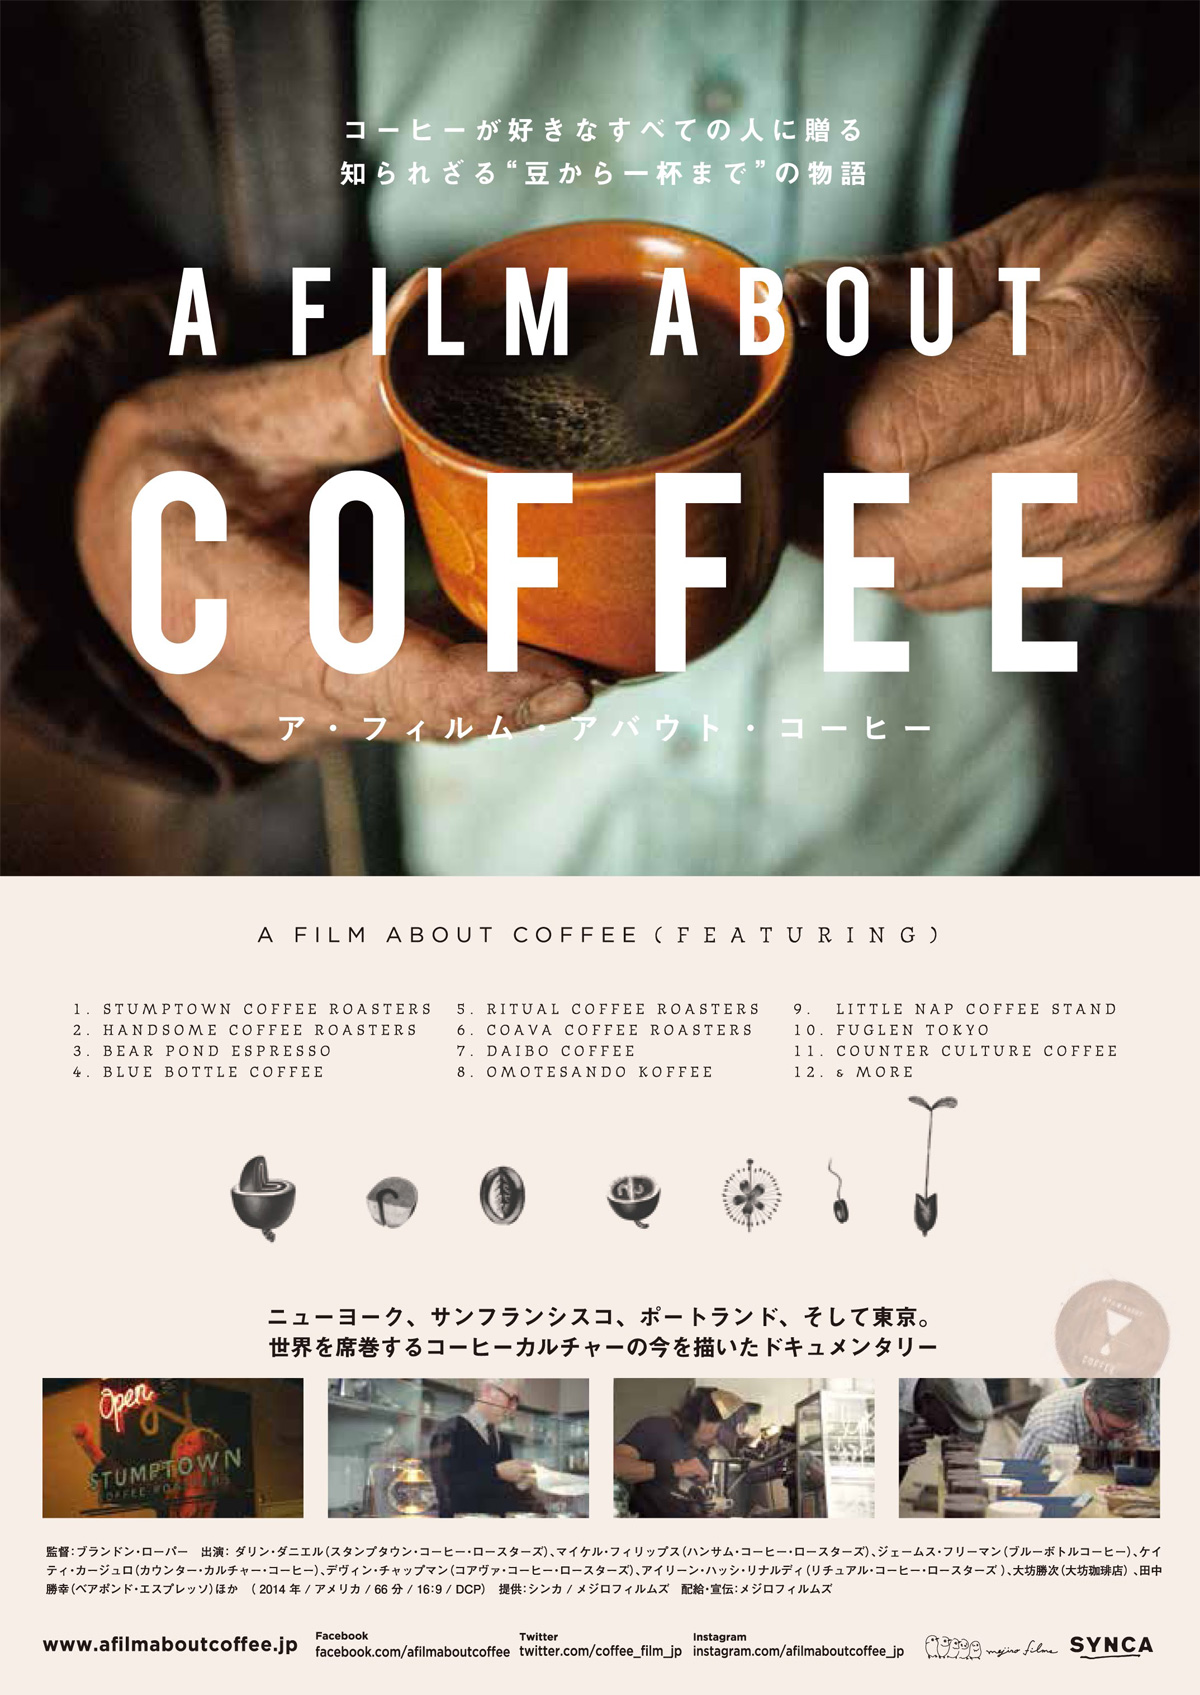 A Film About Coffee （ア・フィルム・アバウト・コーヒー）の画像